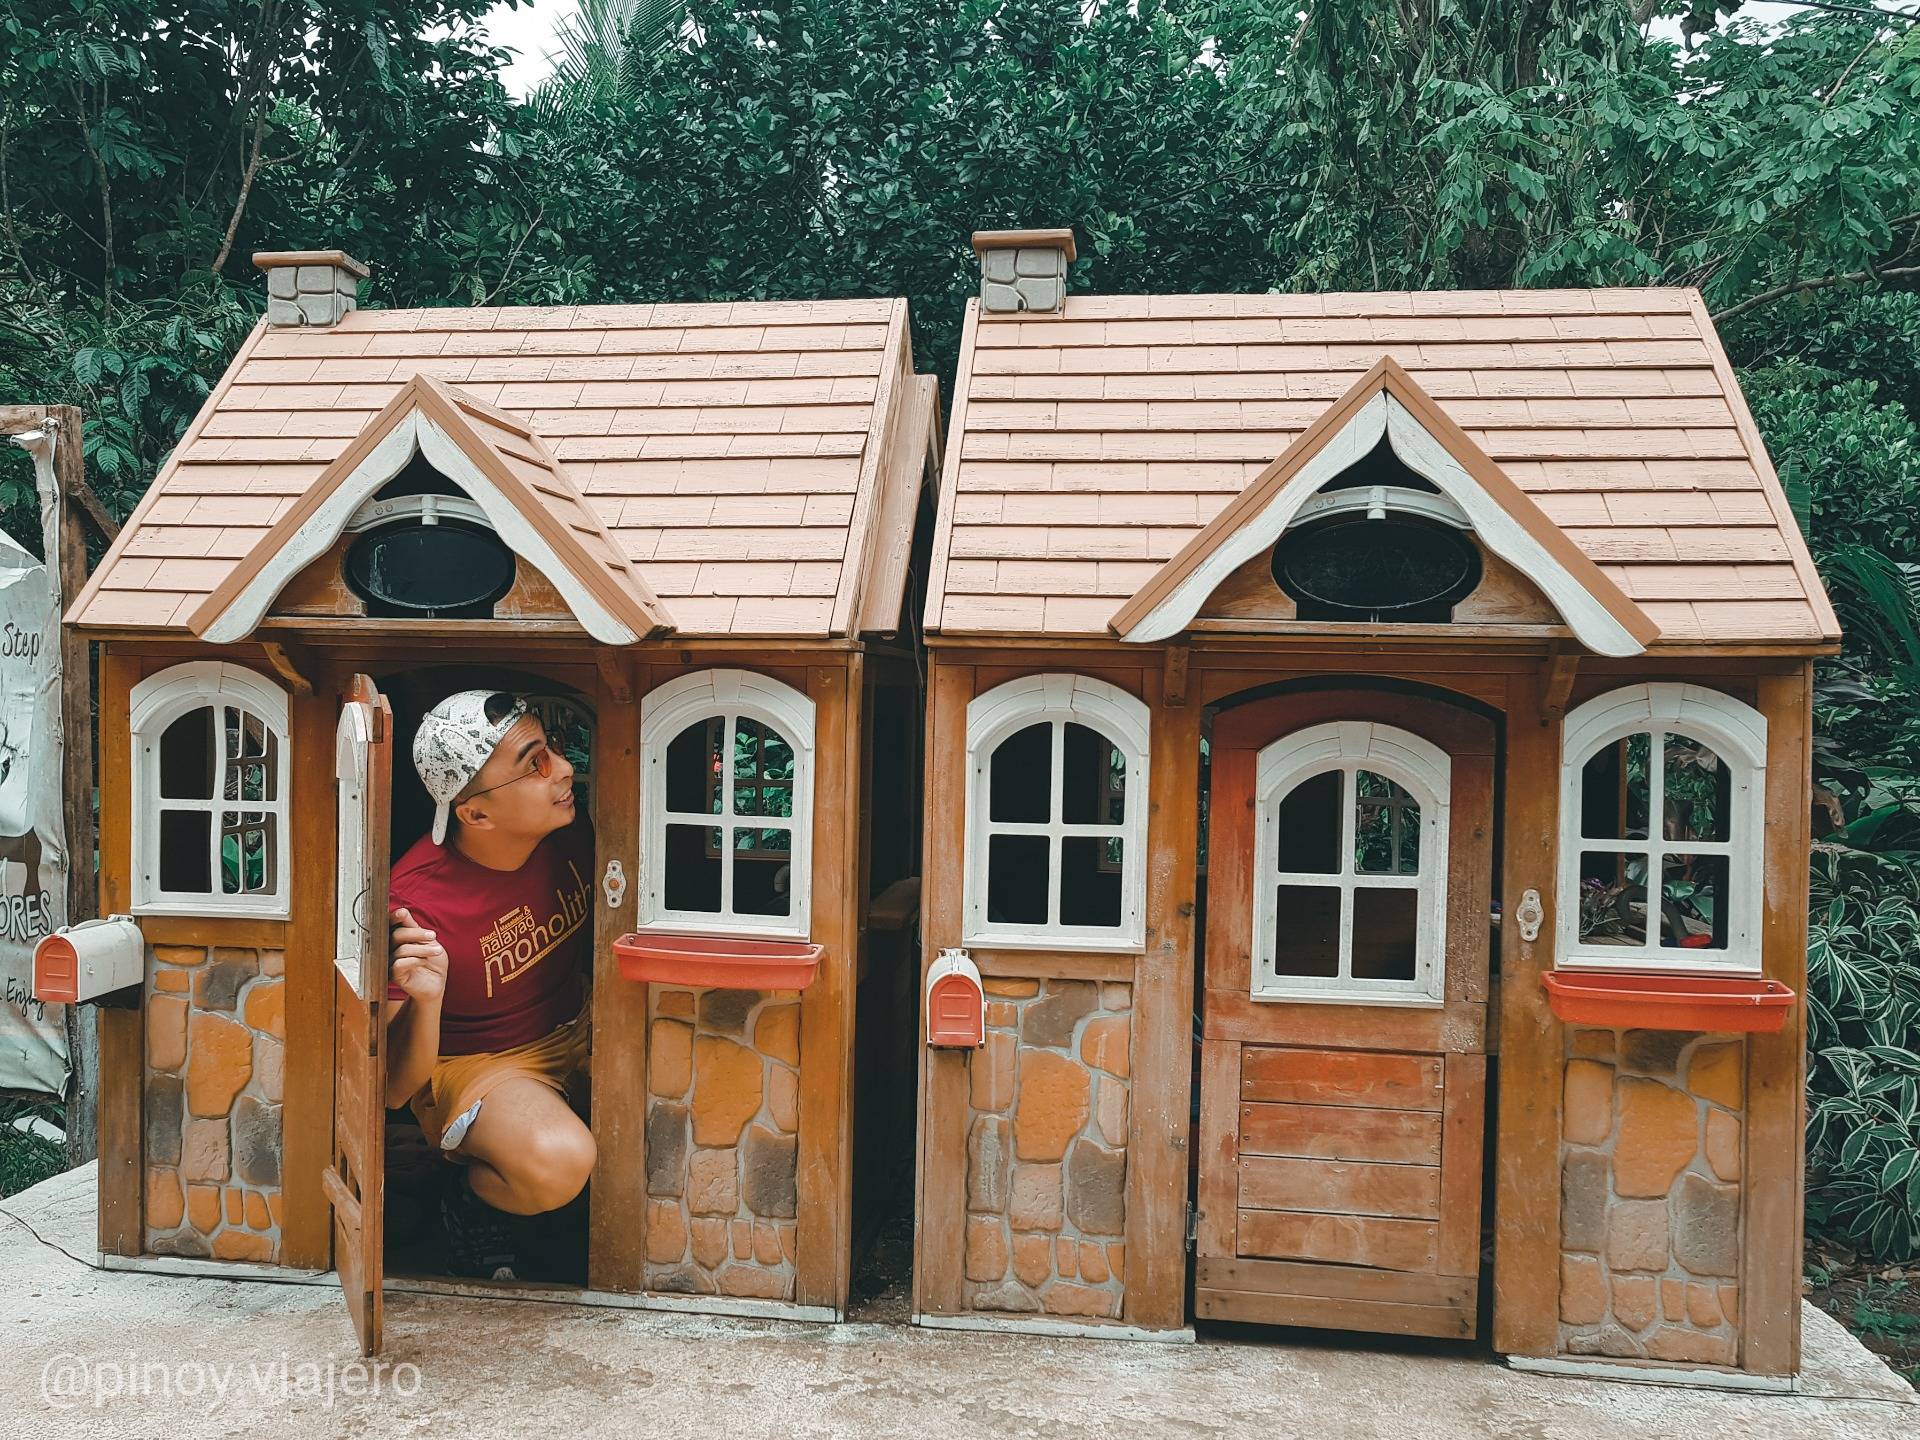 This is my Tiny House